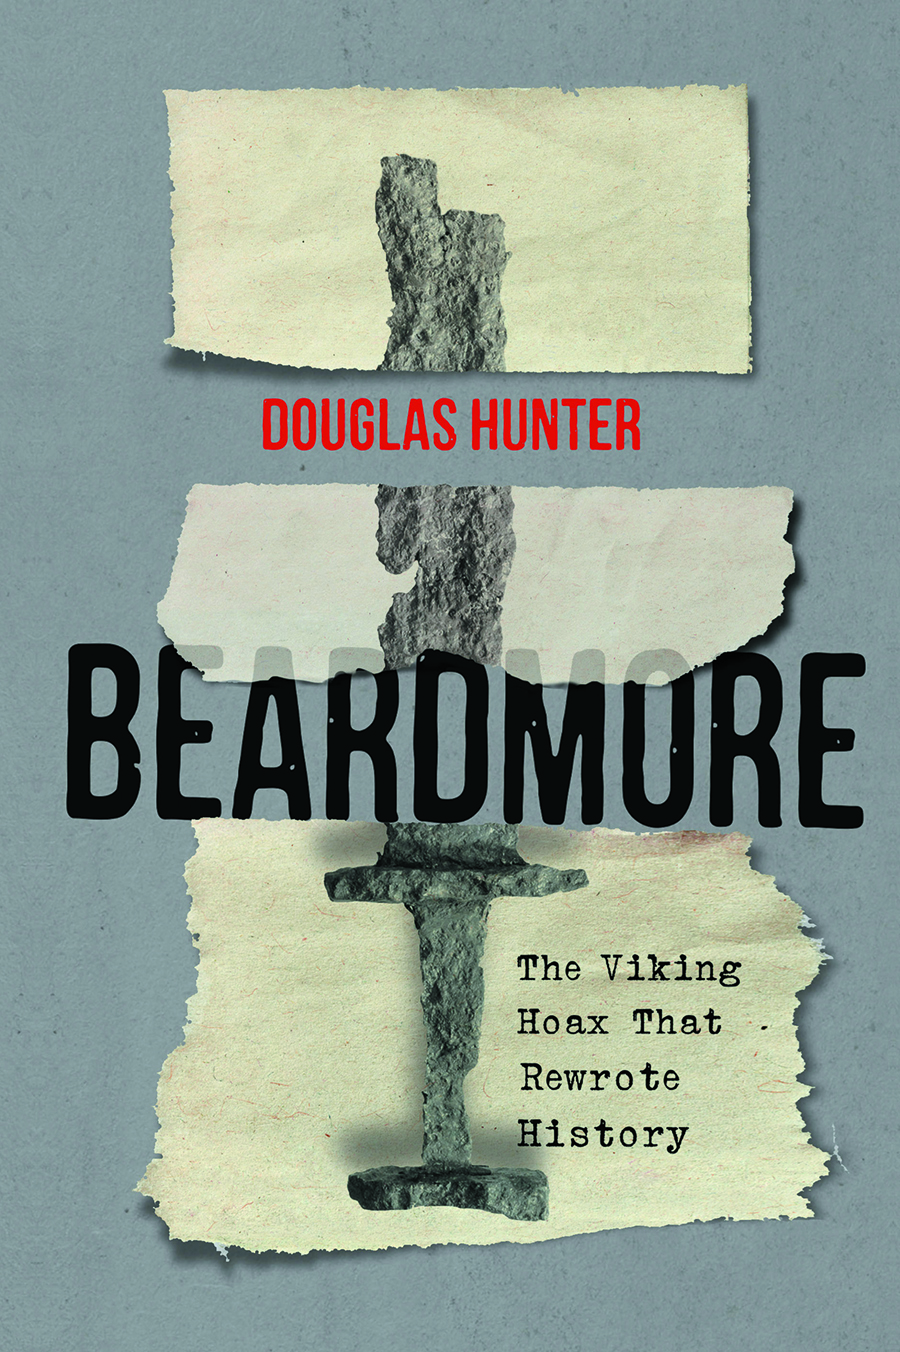 Beardmore: The Viking Hoax that Rewrote History by Douglas Hunter